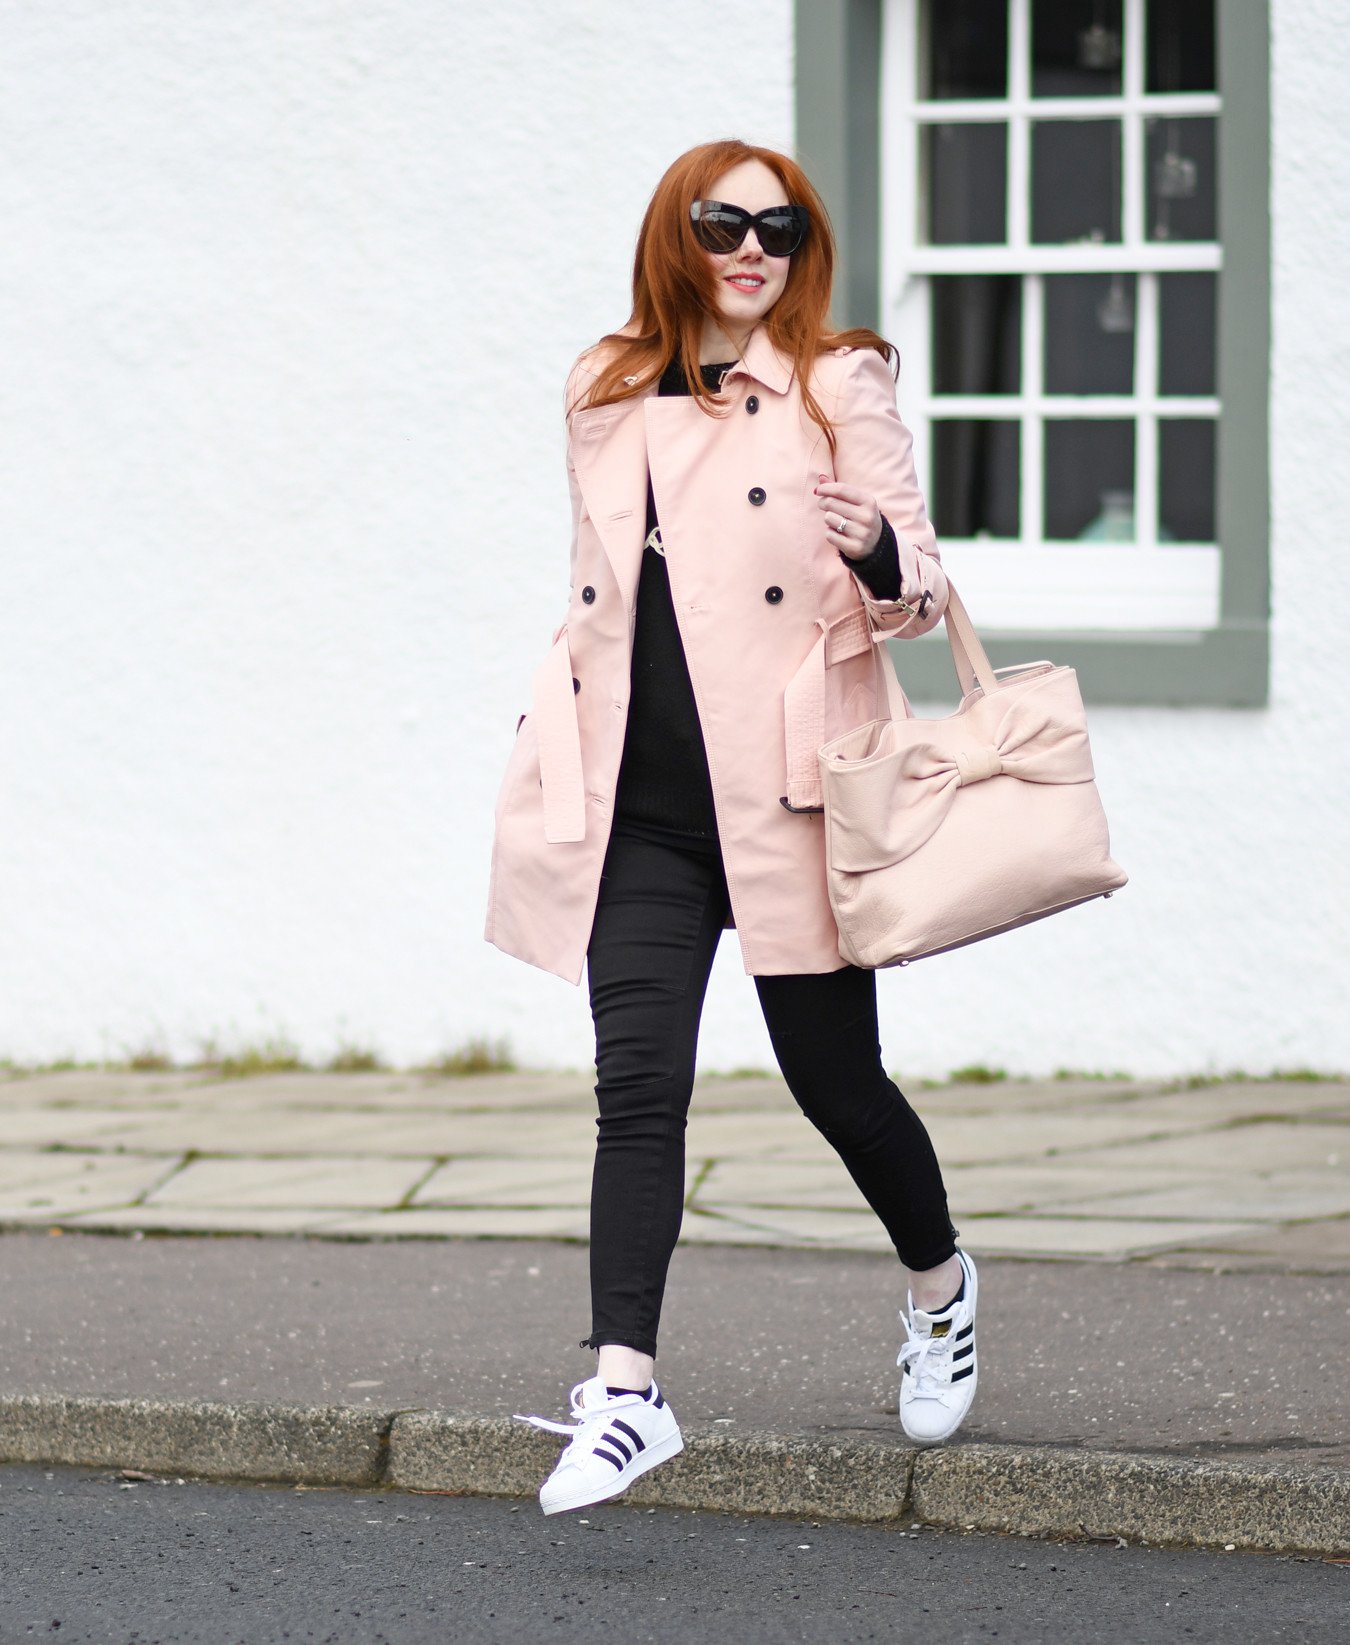 casual outfit ideas - trench coat and sneakers